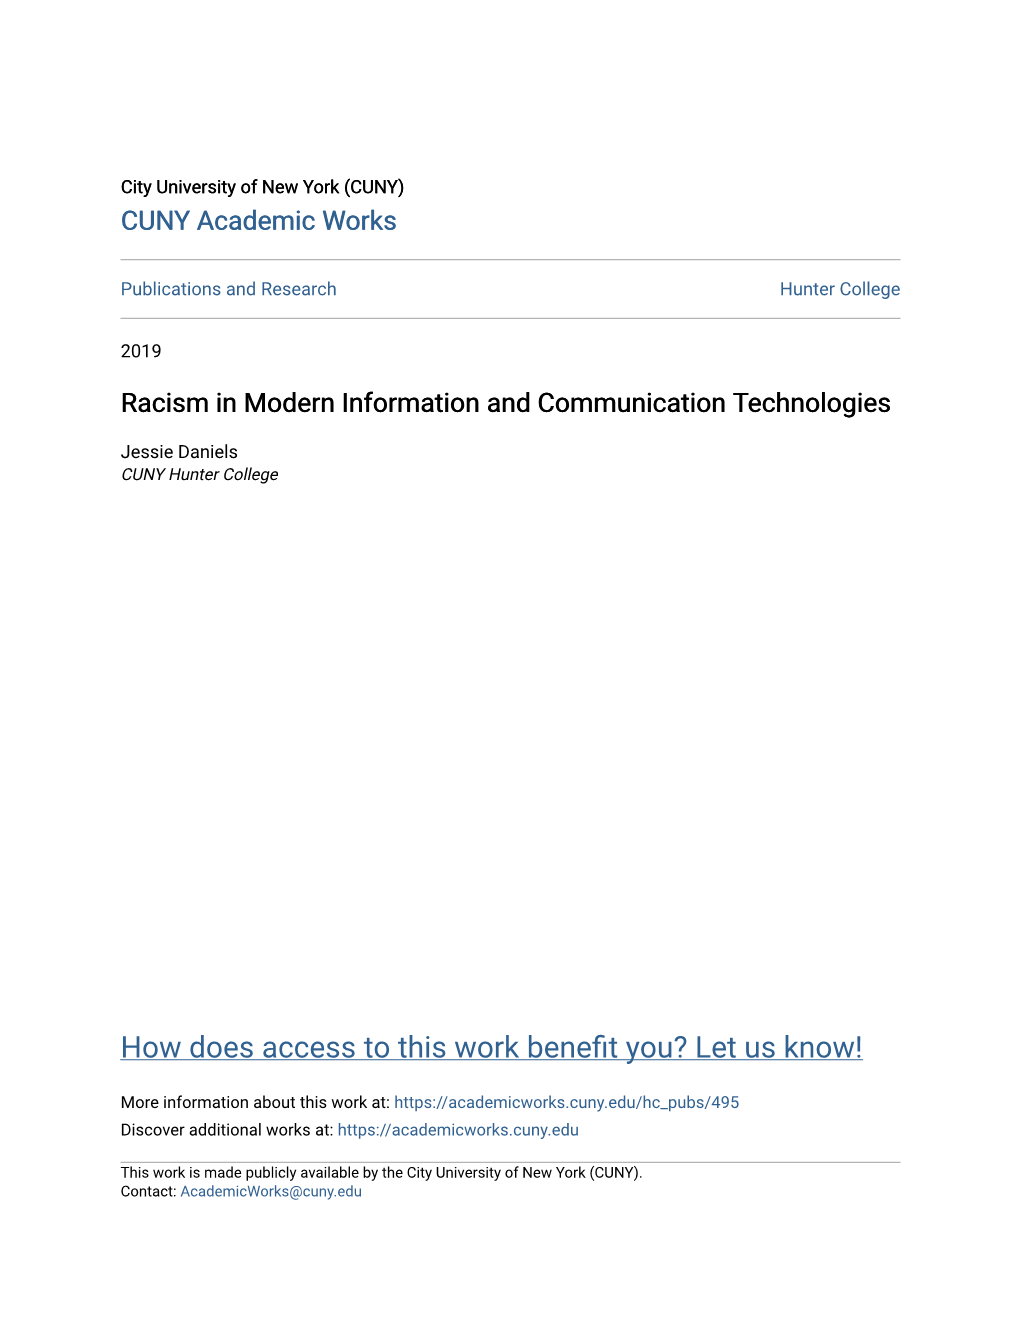 Racism in Modern Information and Communication Technologies